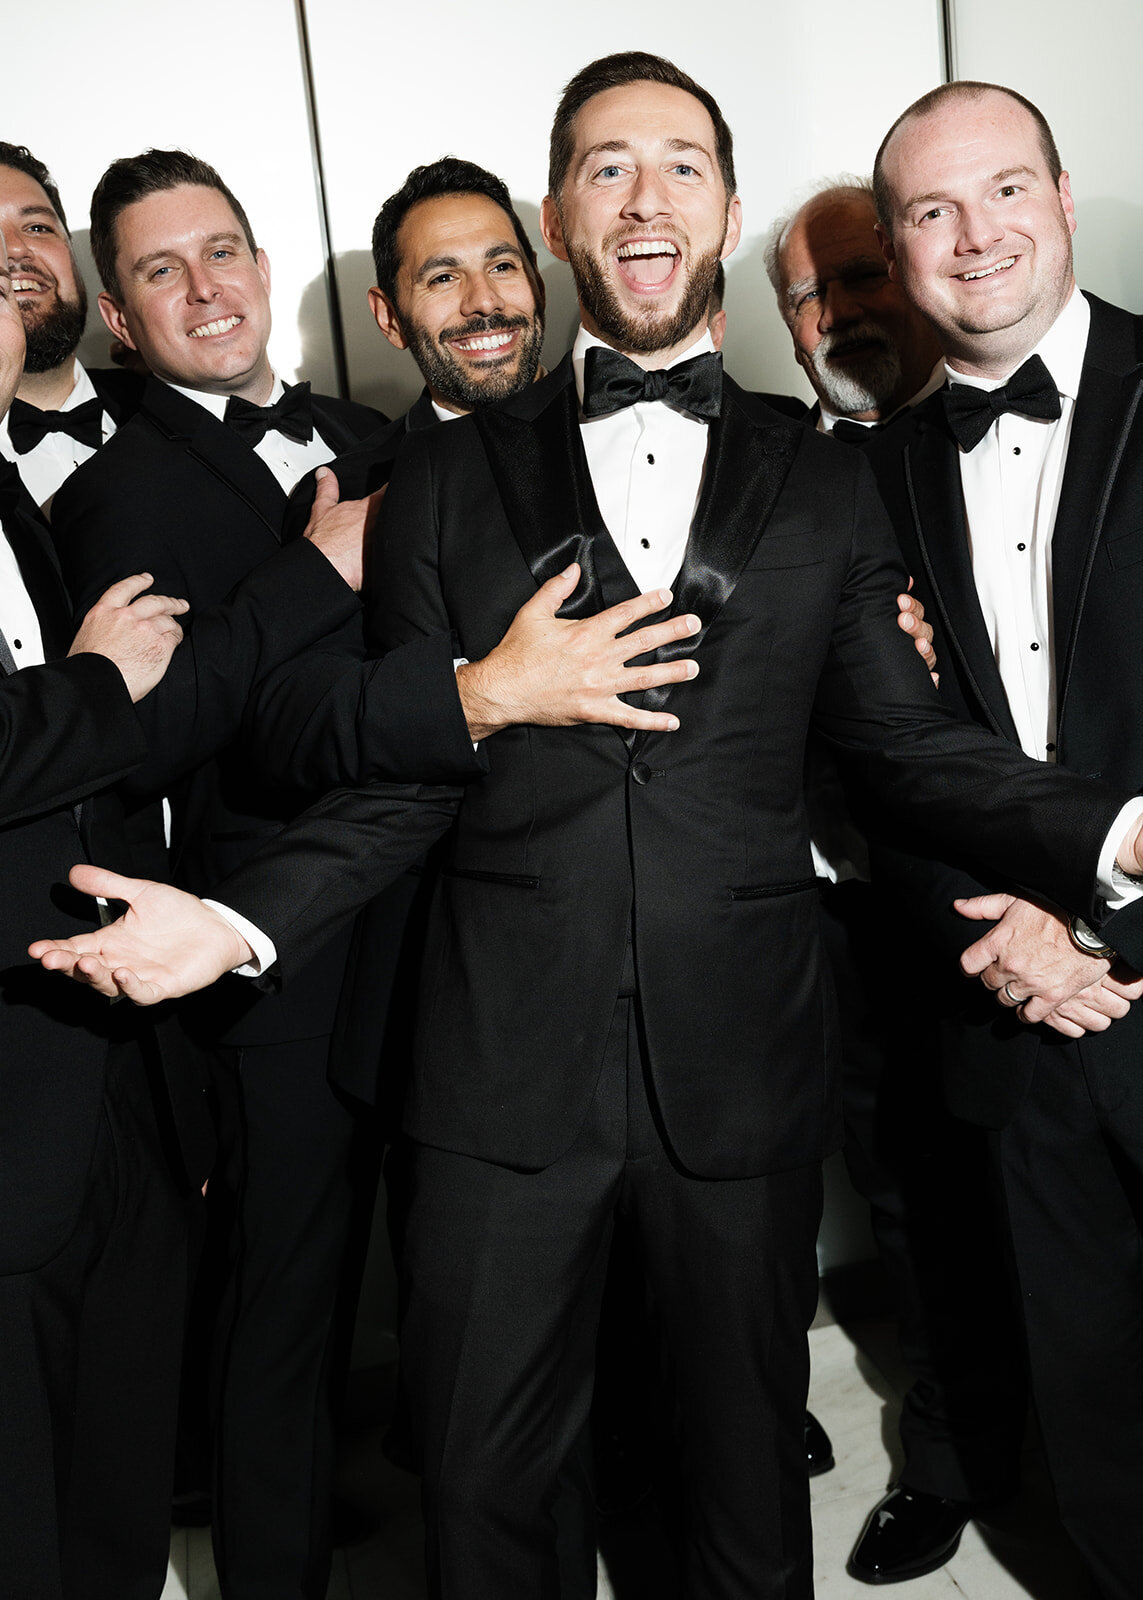 a group of men cheering in wedding suits